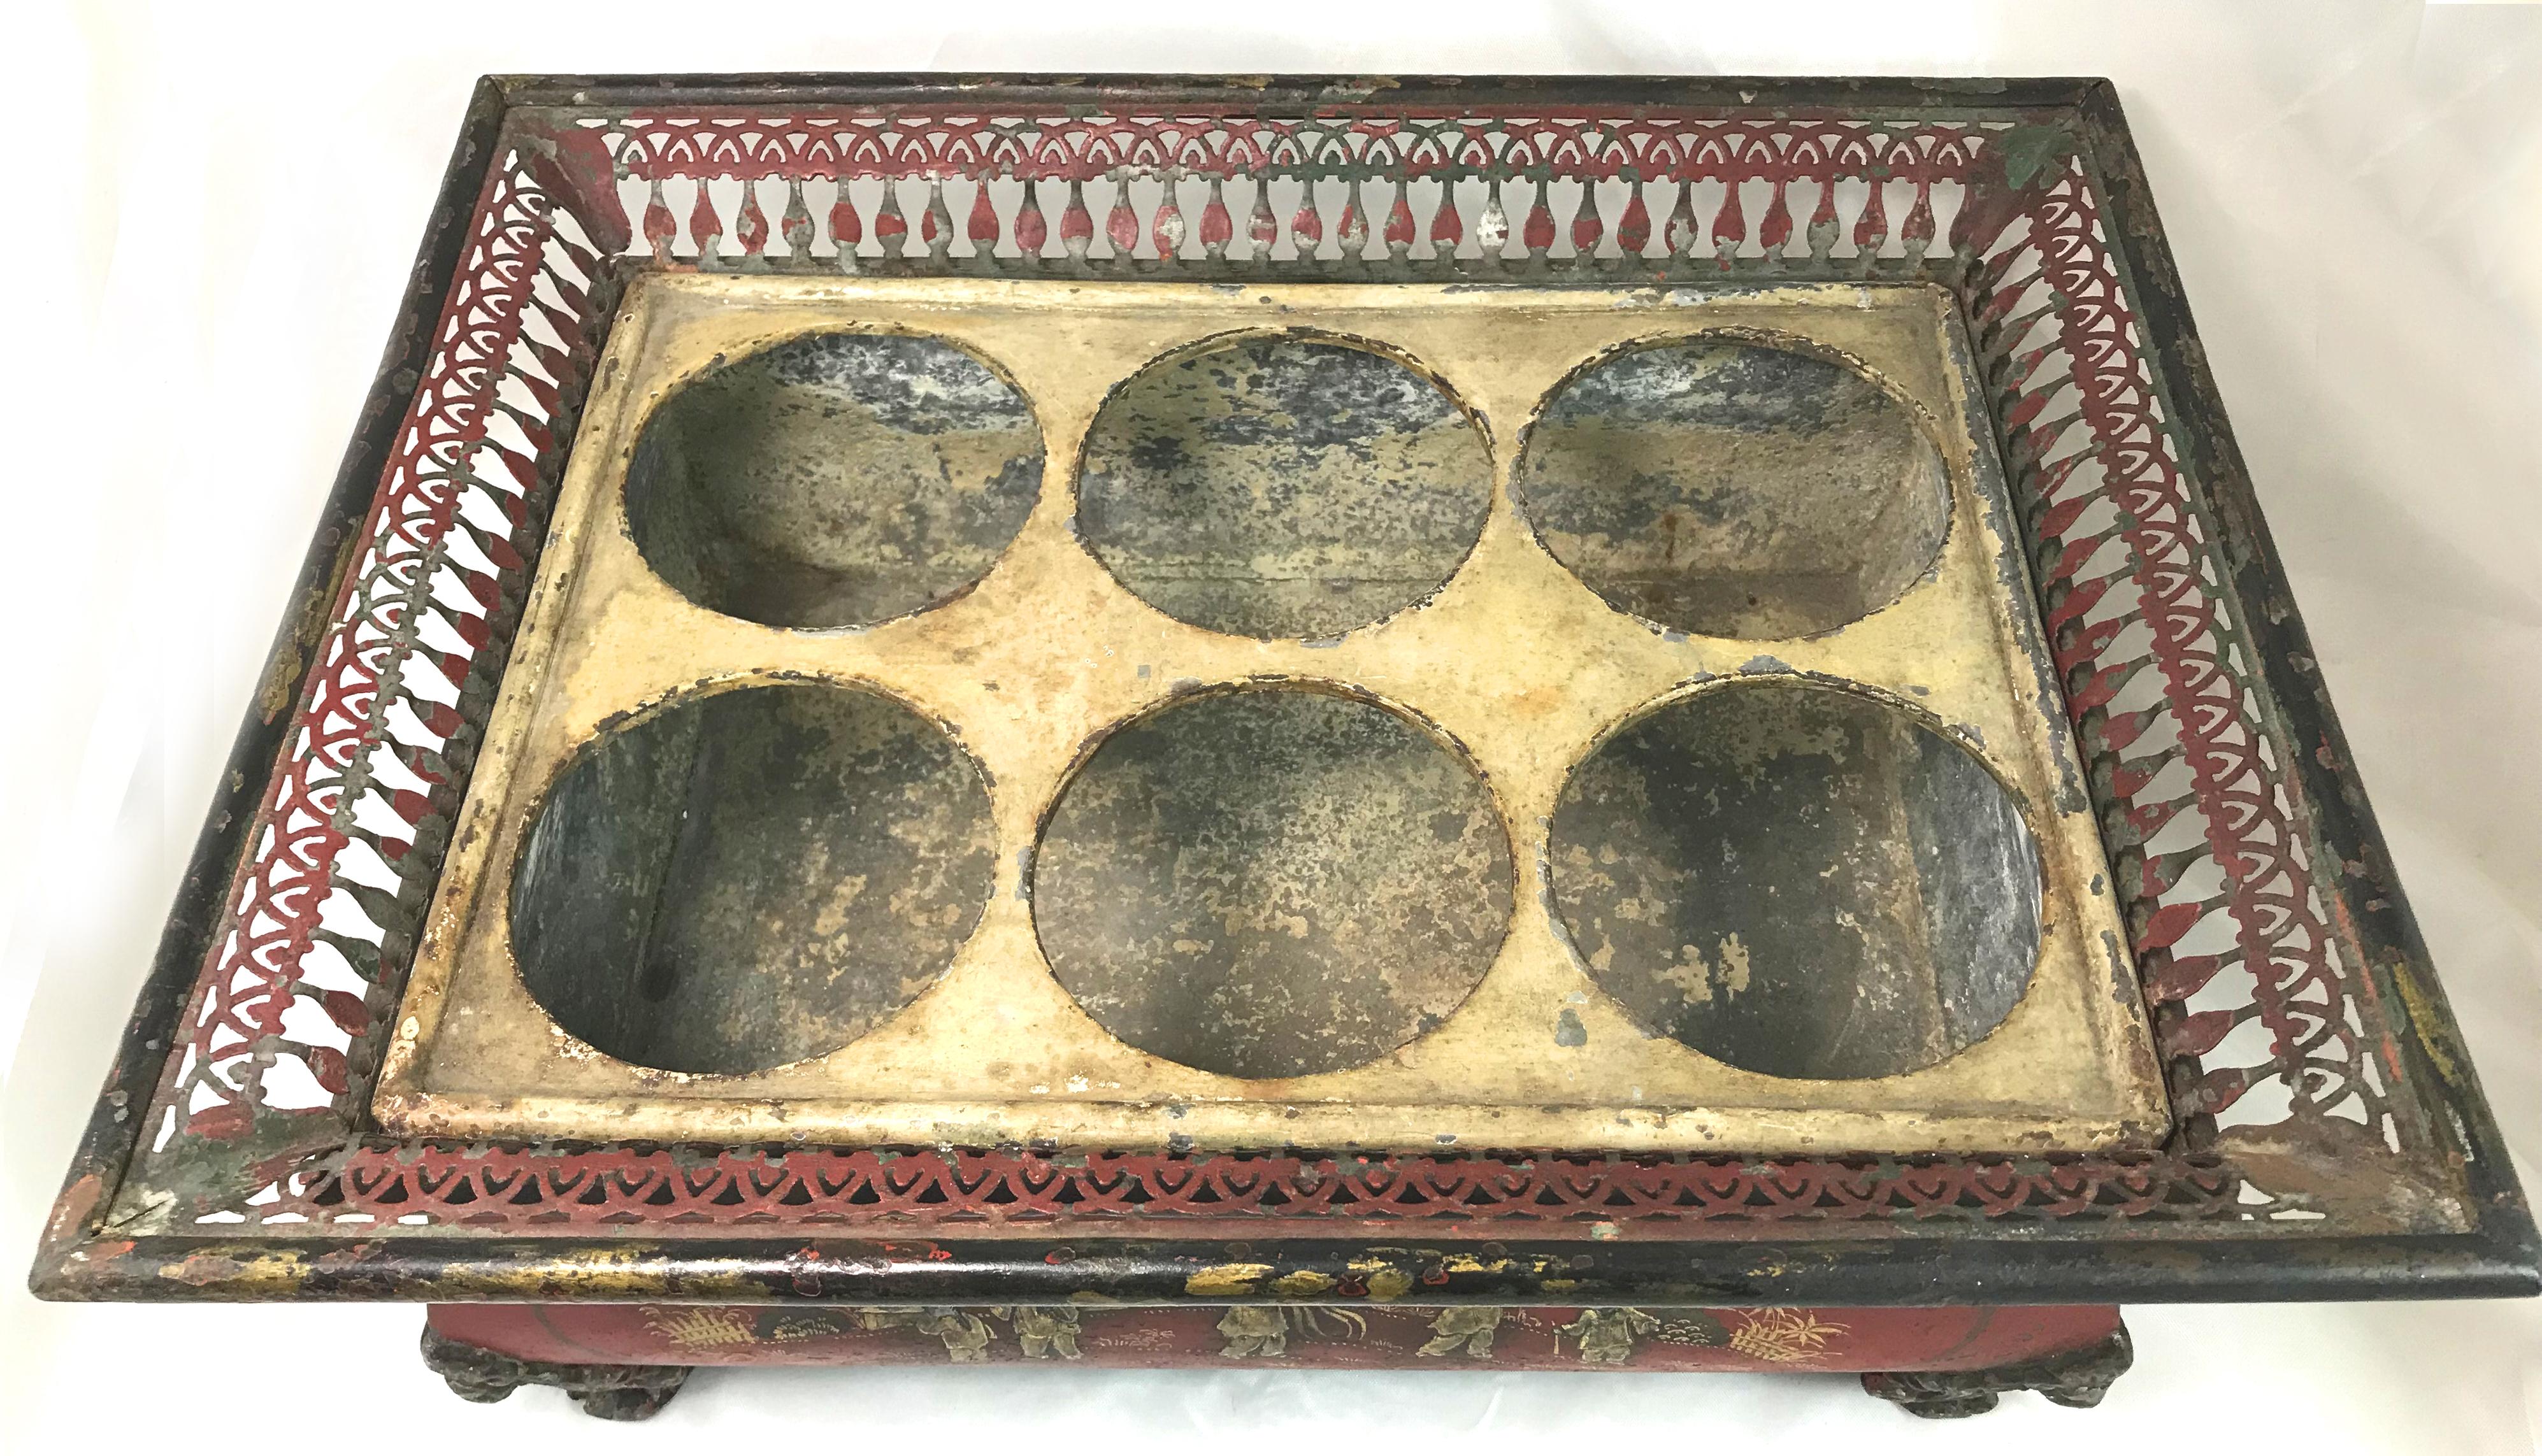 A wonderful polychrome tin tole six bottle wine caddy or refroidisseur de vin, with removable divider, featuring raised gold Chinese figures and painted foliate decoration on all four sides on a red background, with applied figural bird corners and